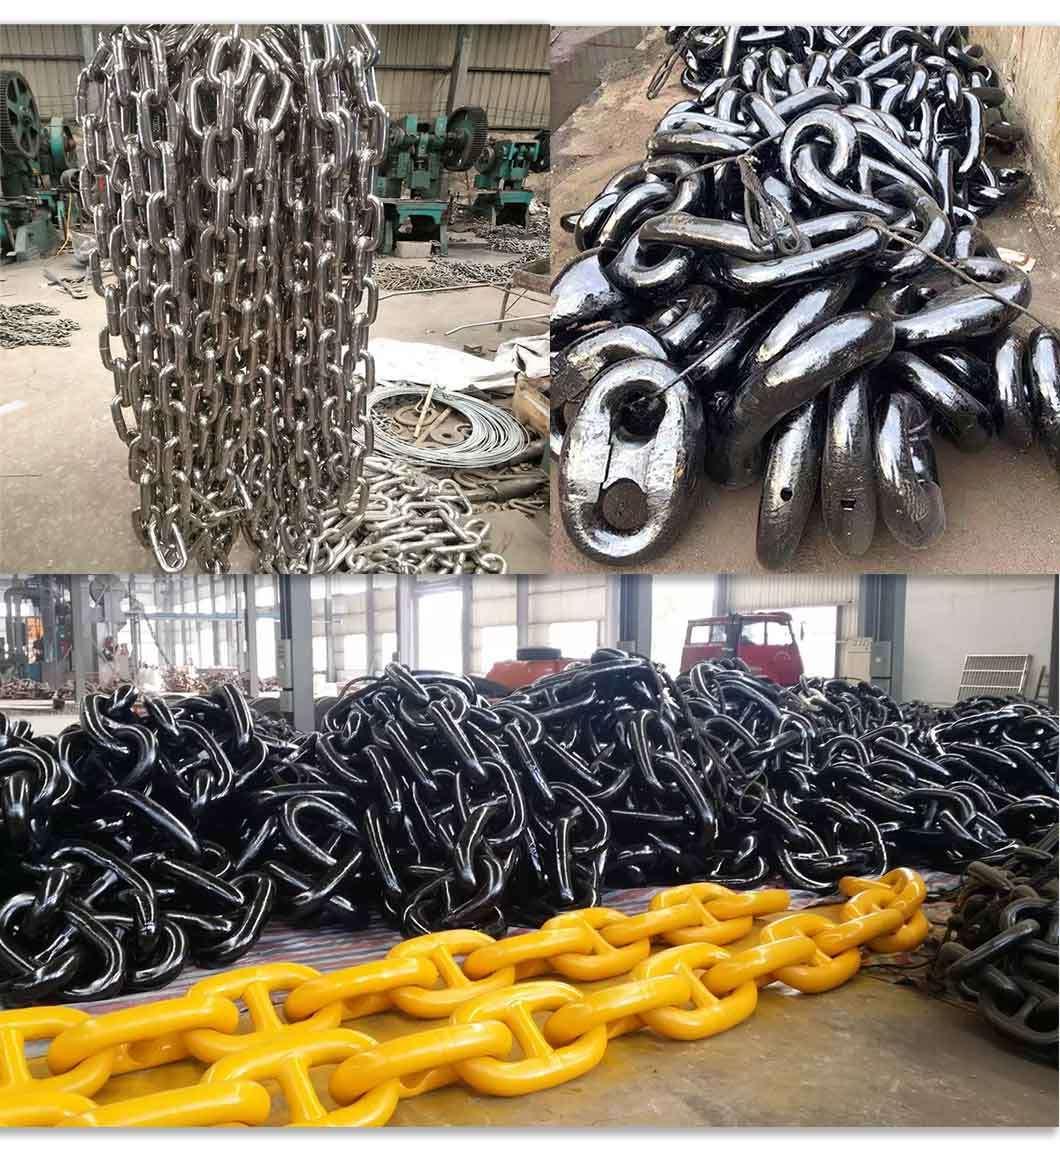 Anchor Chain with Two Year Warranty Period in Stock